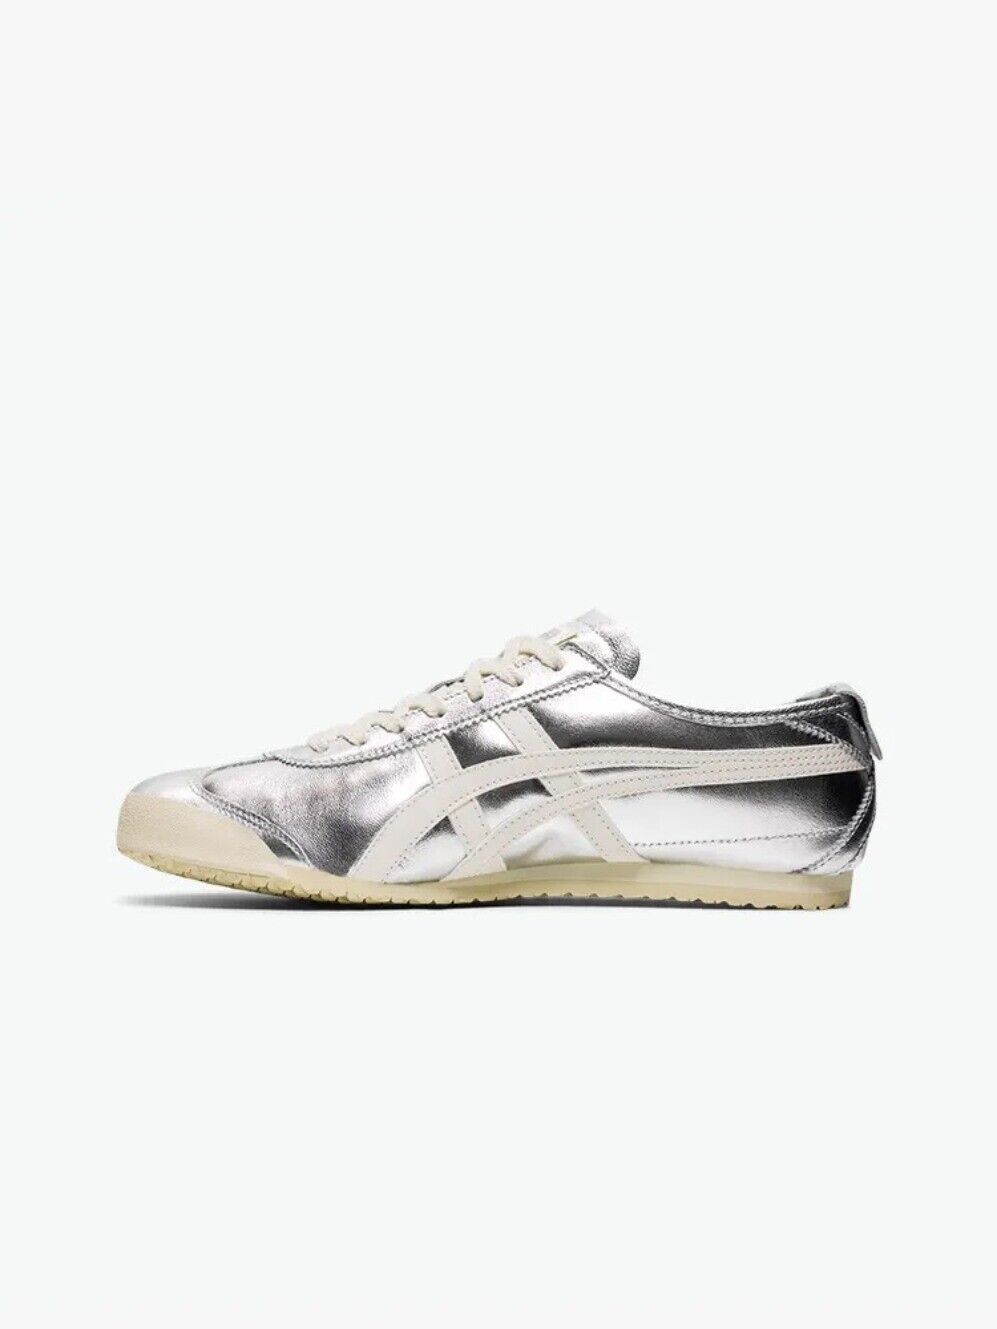 2024Unisex Onitsuka Tiger MEXICO 66 Silver Yellow Leather Sneakers Running Shoes